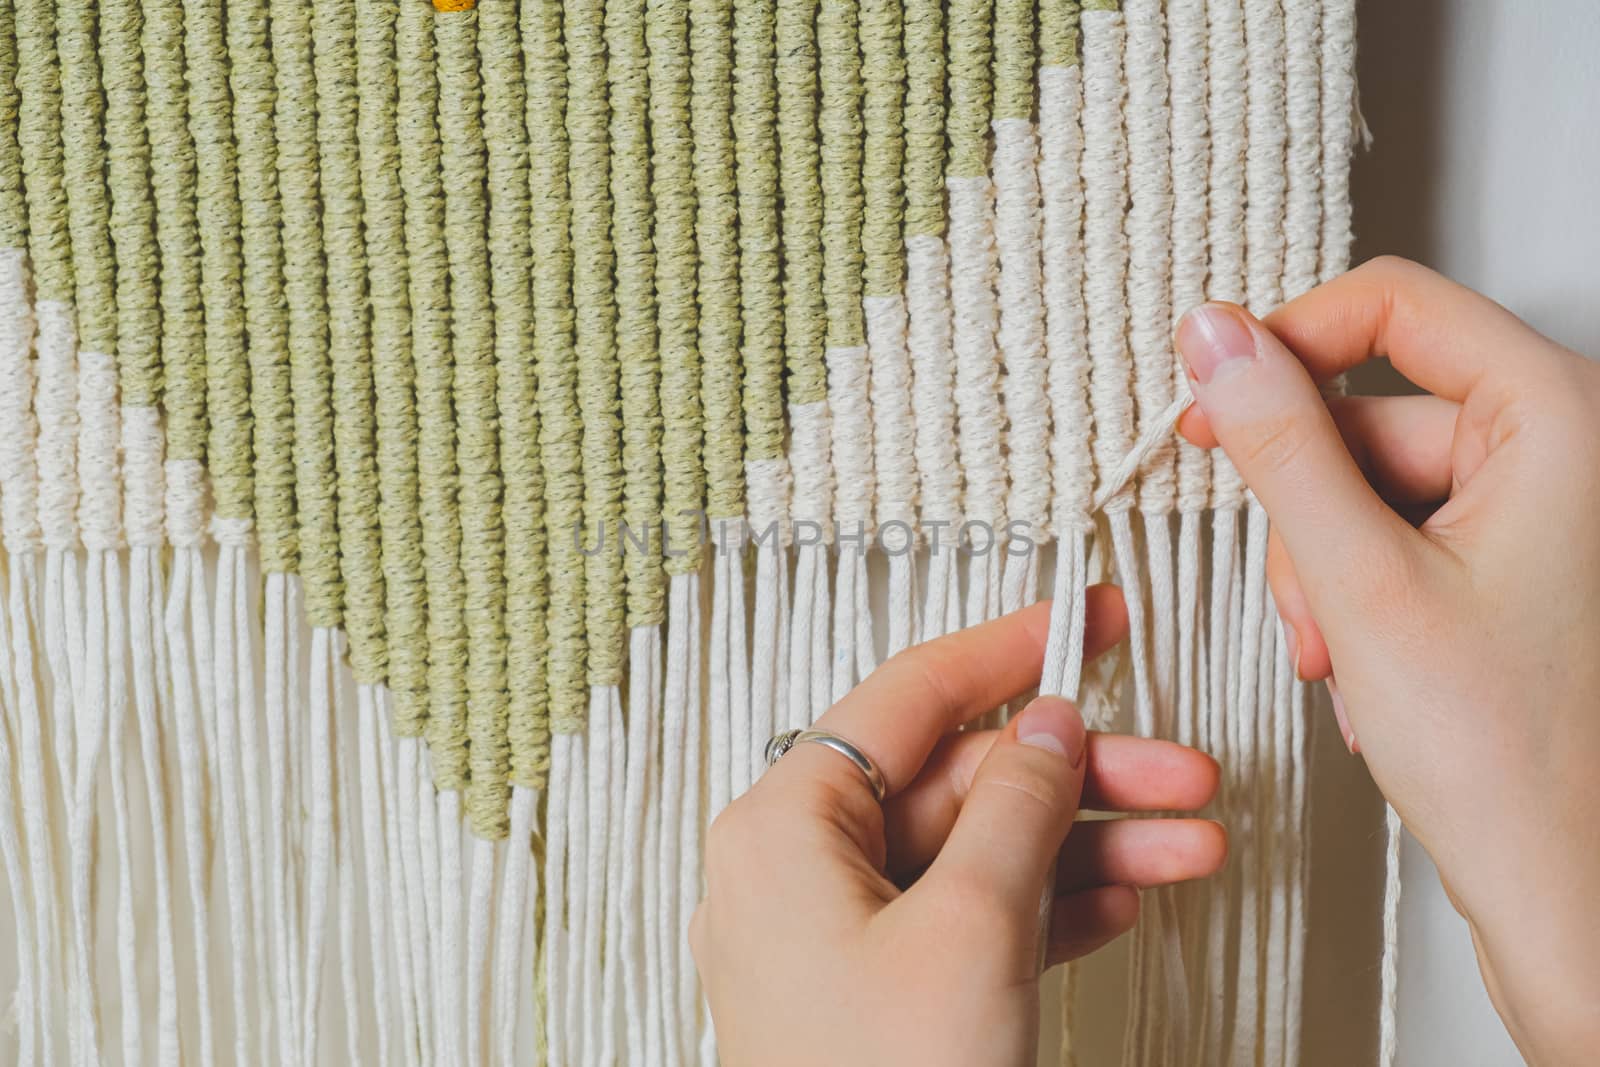 Hands doing macrame craft. Hand-making a cotton rope wall-hanging decor piece, concept of handicraft hobby or handworking